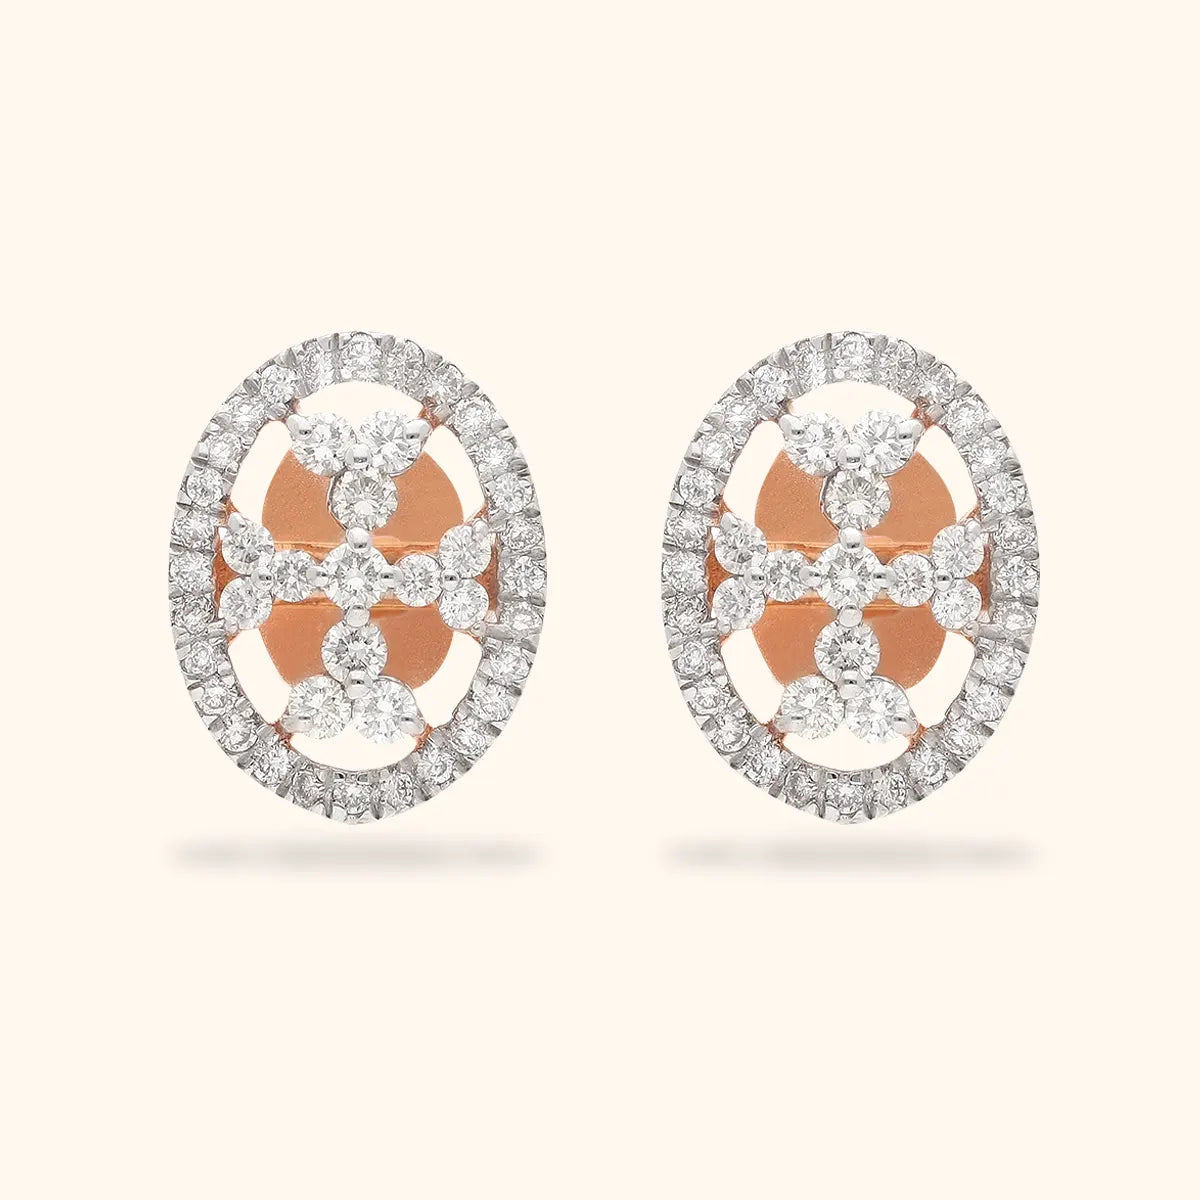 Adorning Ears with Perfection Diamond Earring 18KT